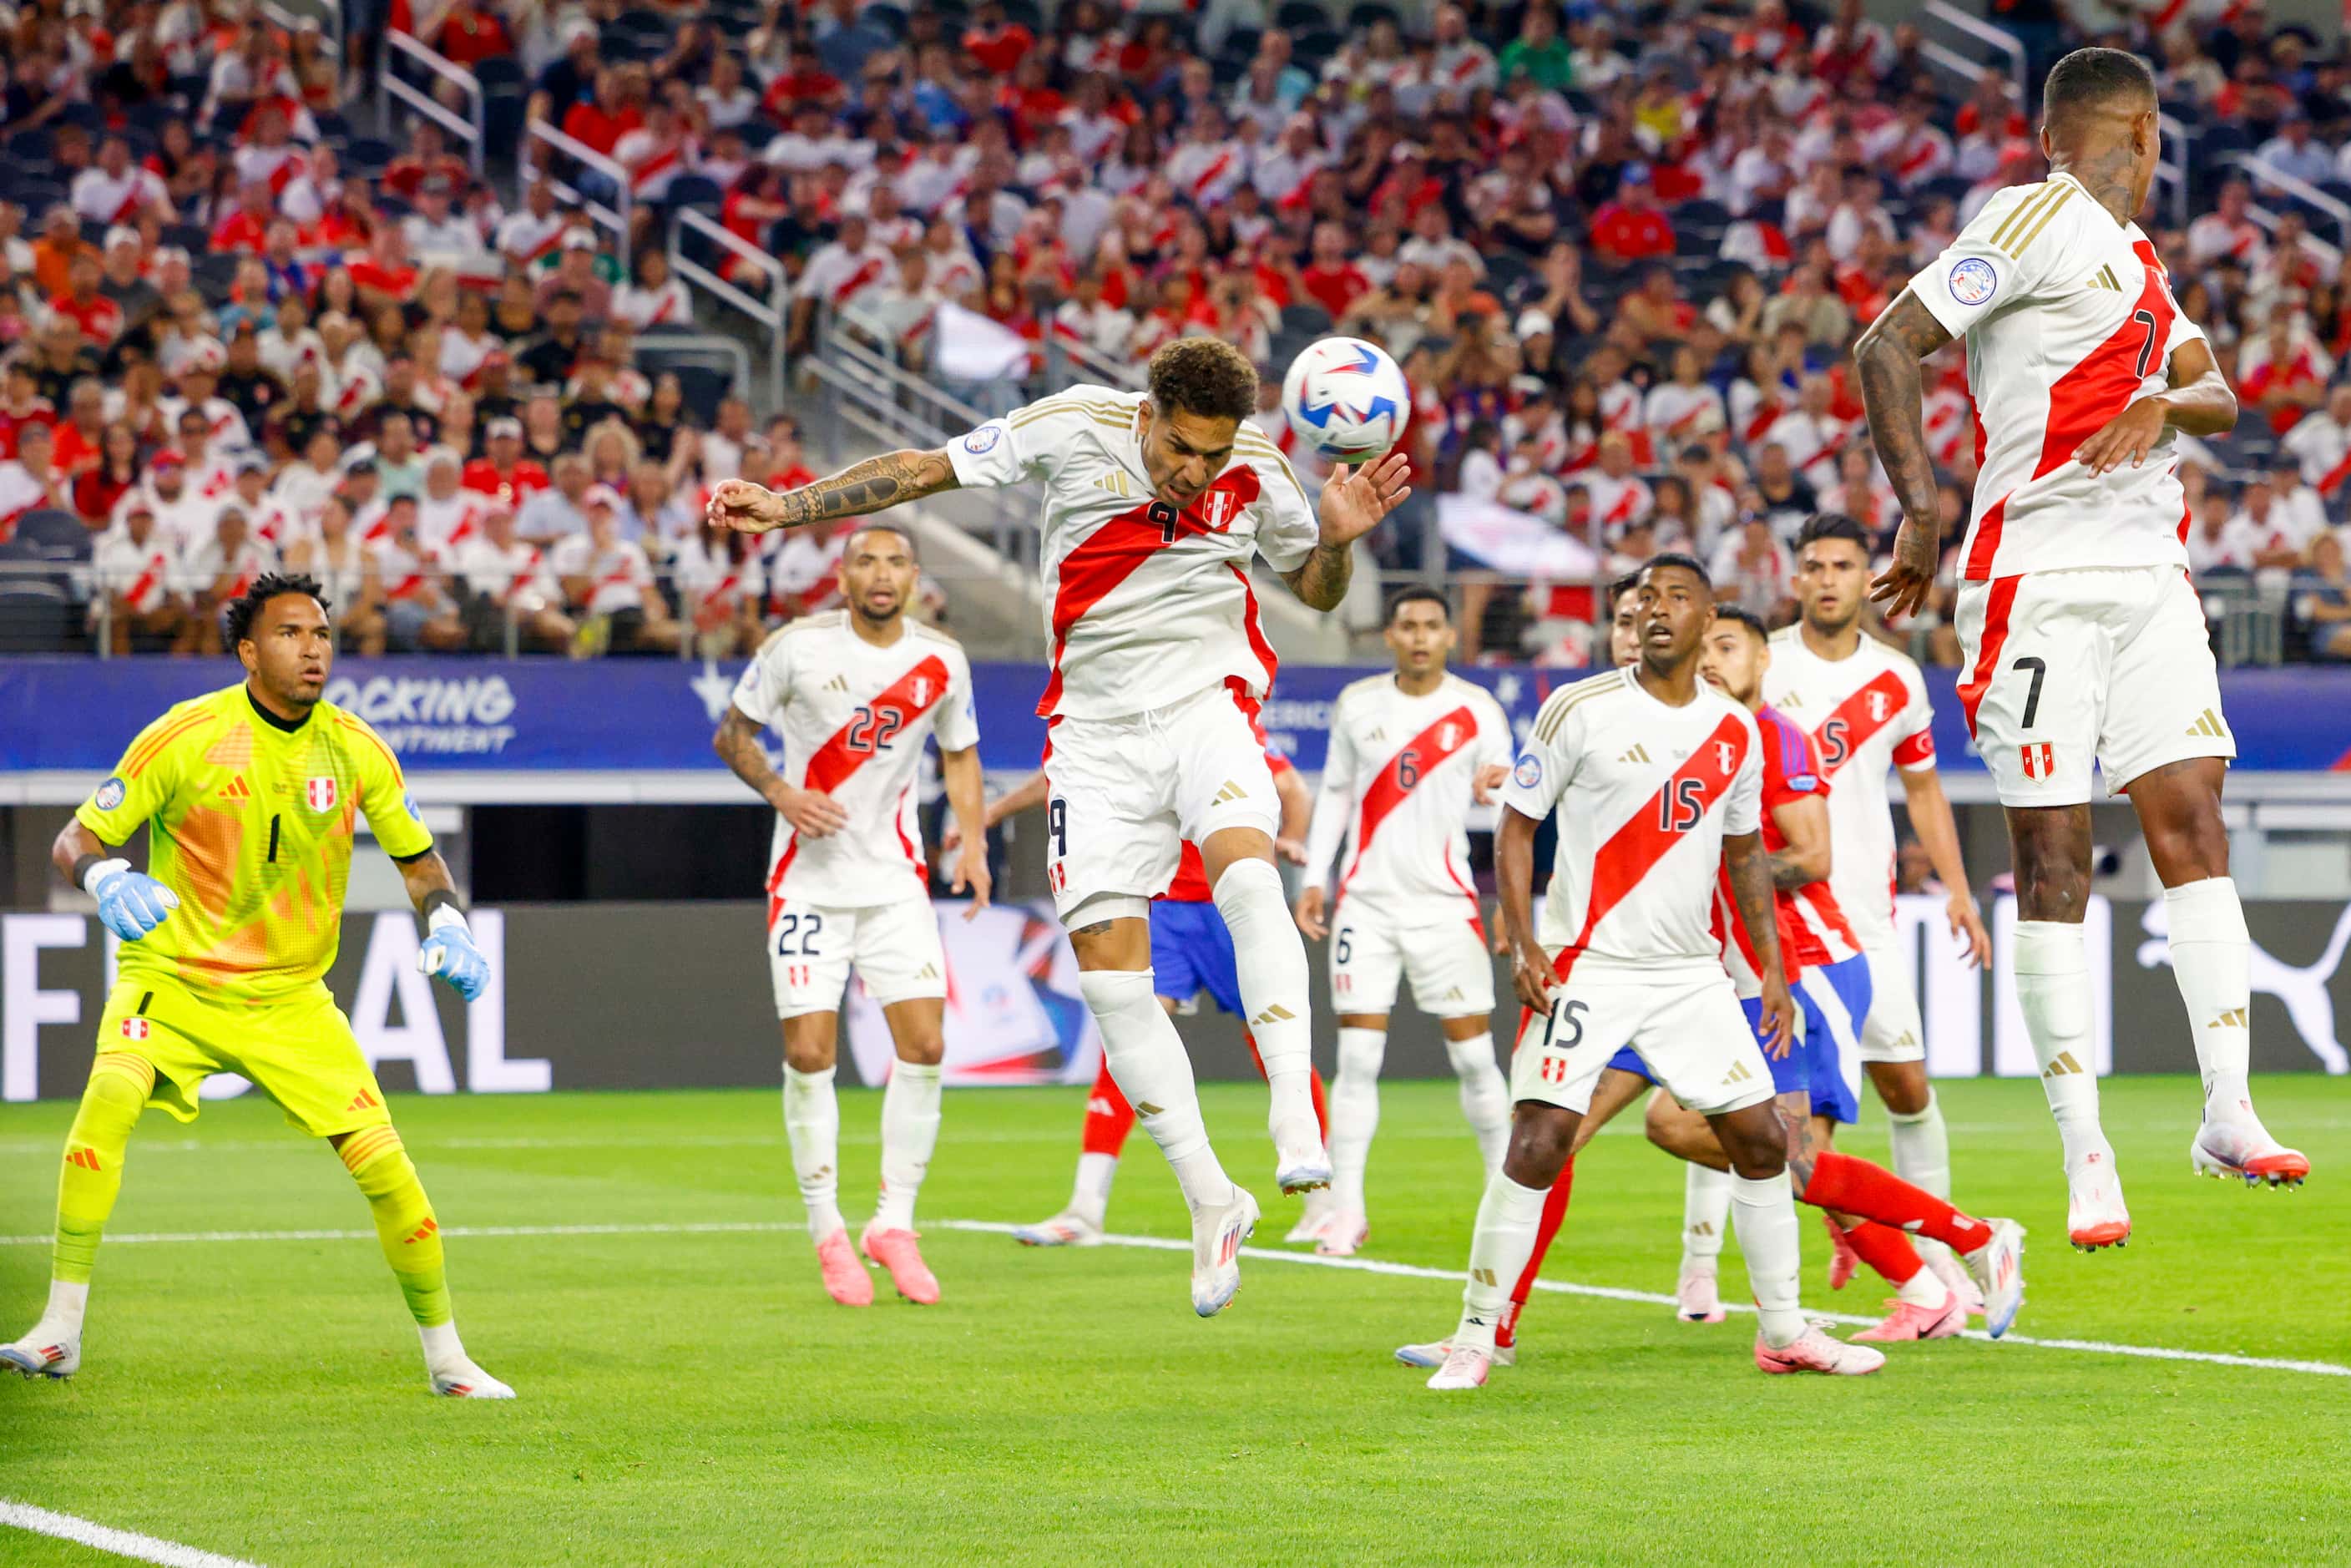 Peru forward José Paolo Guerrero (9) clears the ball after a corner kick during the second...